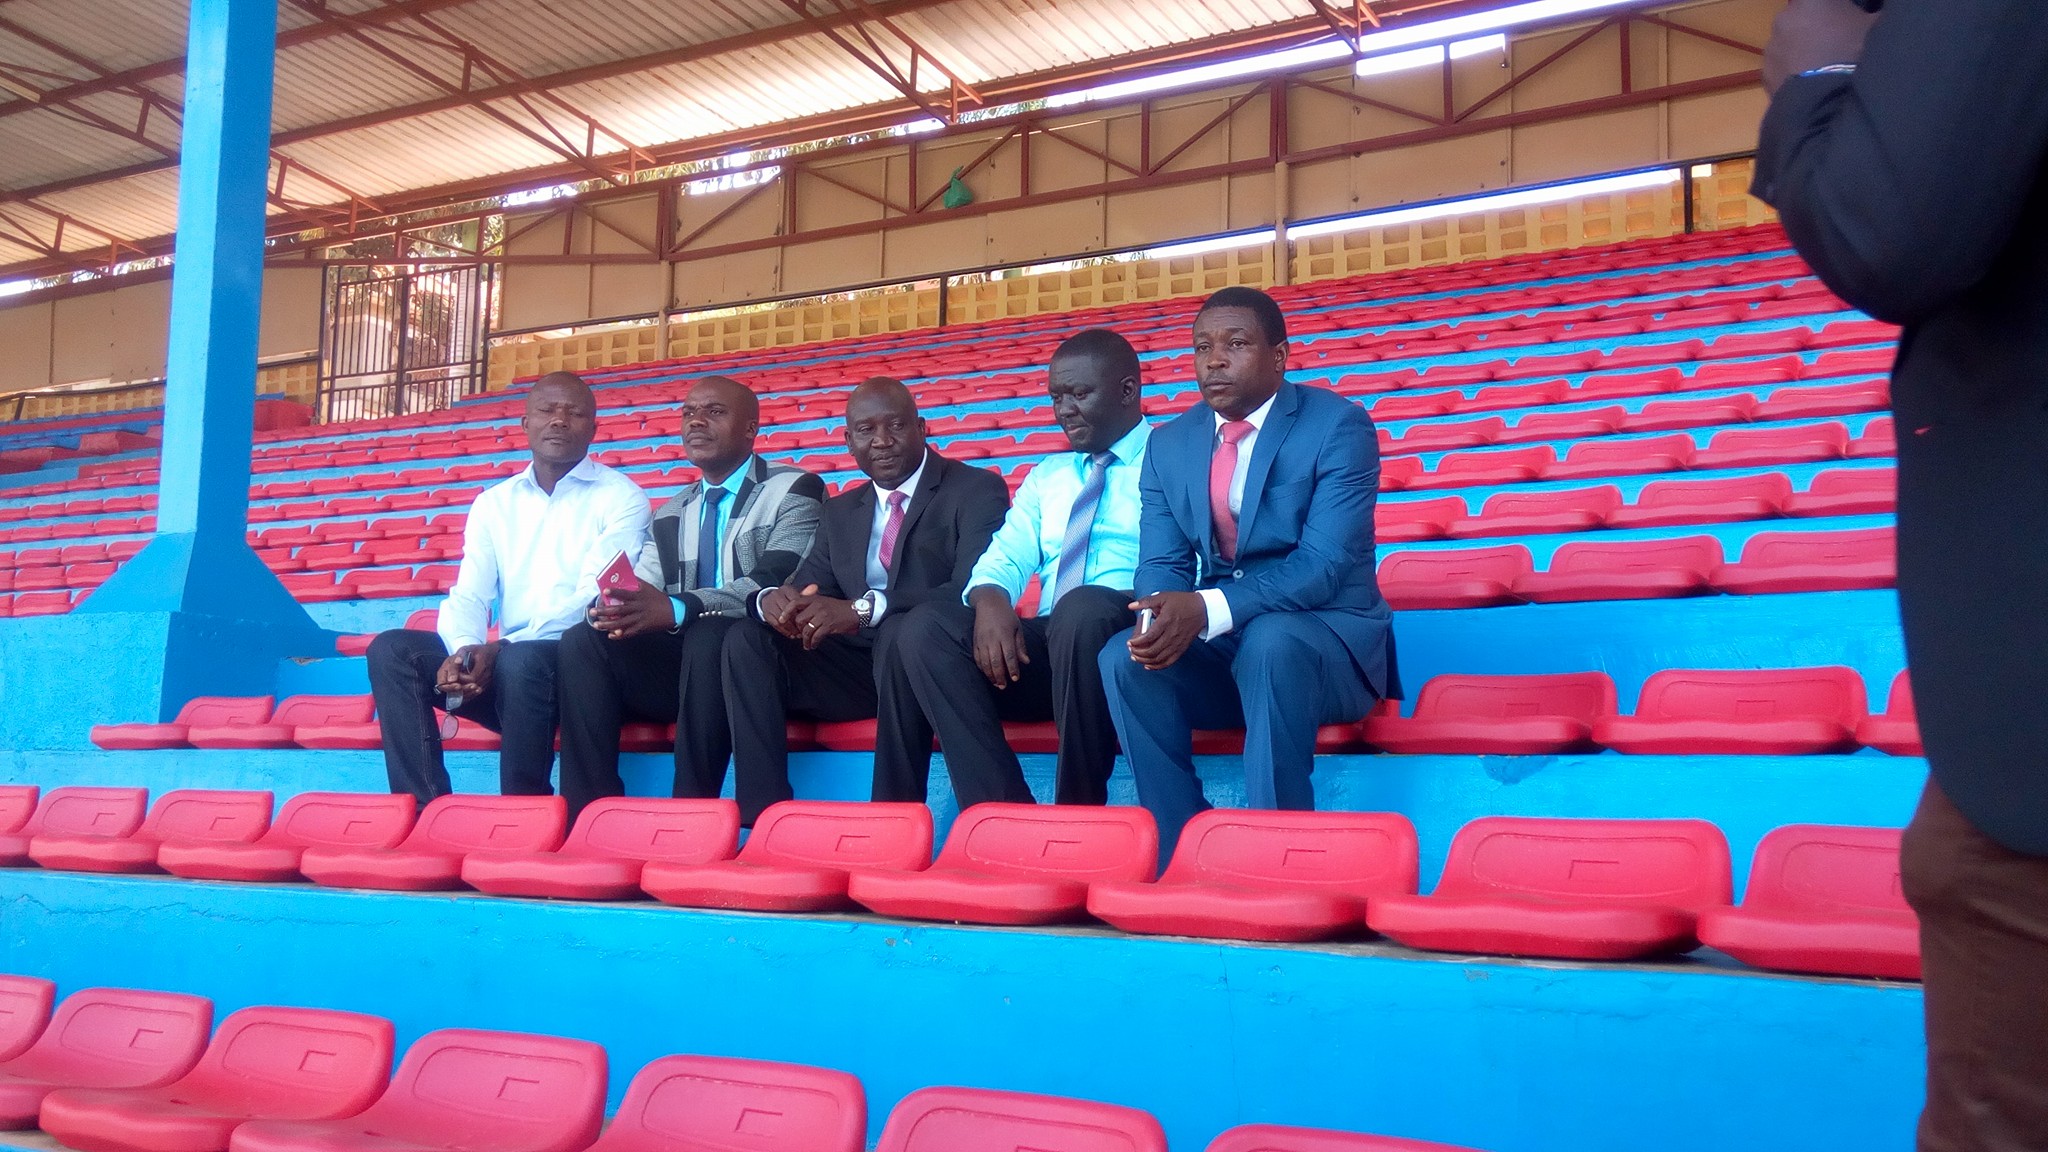 Vipers patron, Mulindwa (In black suit) seated with colleagues at newly furbished stadium